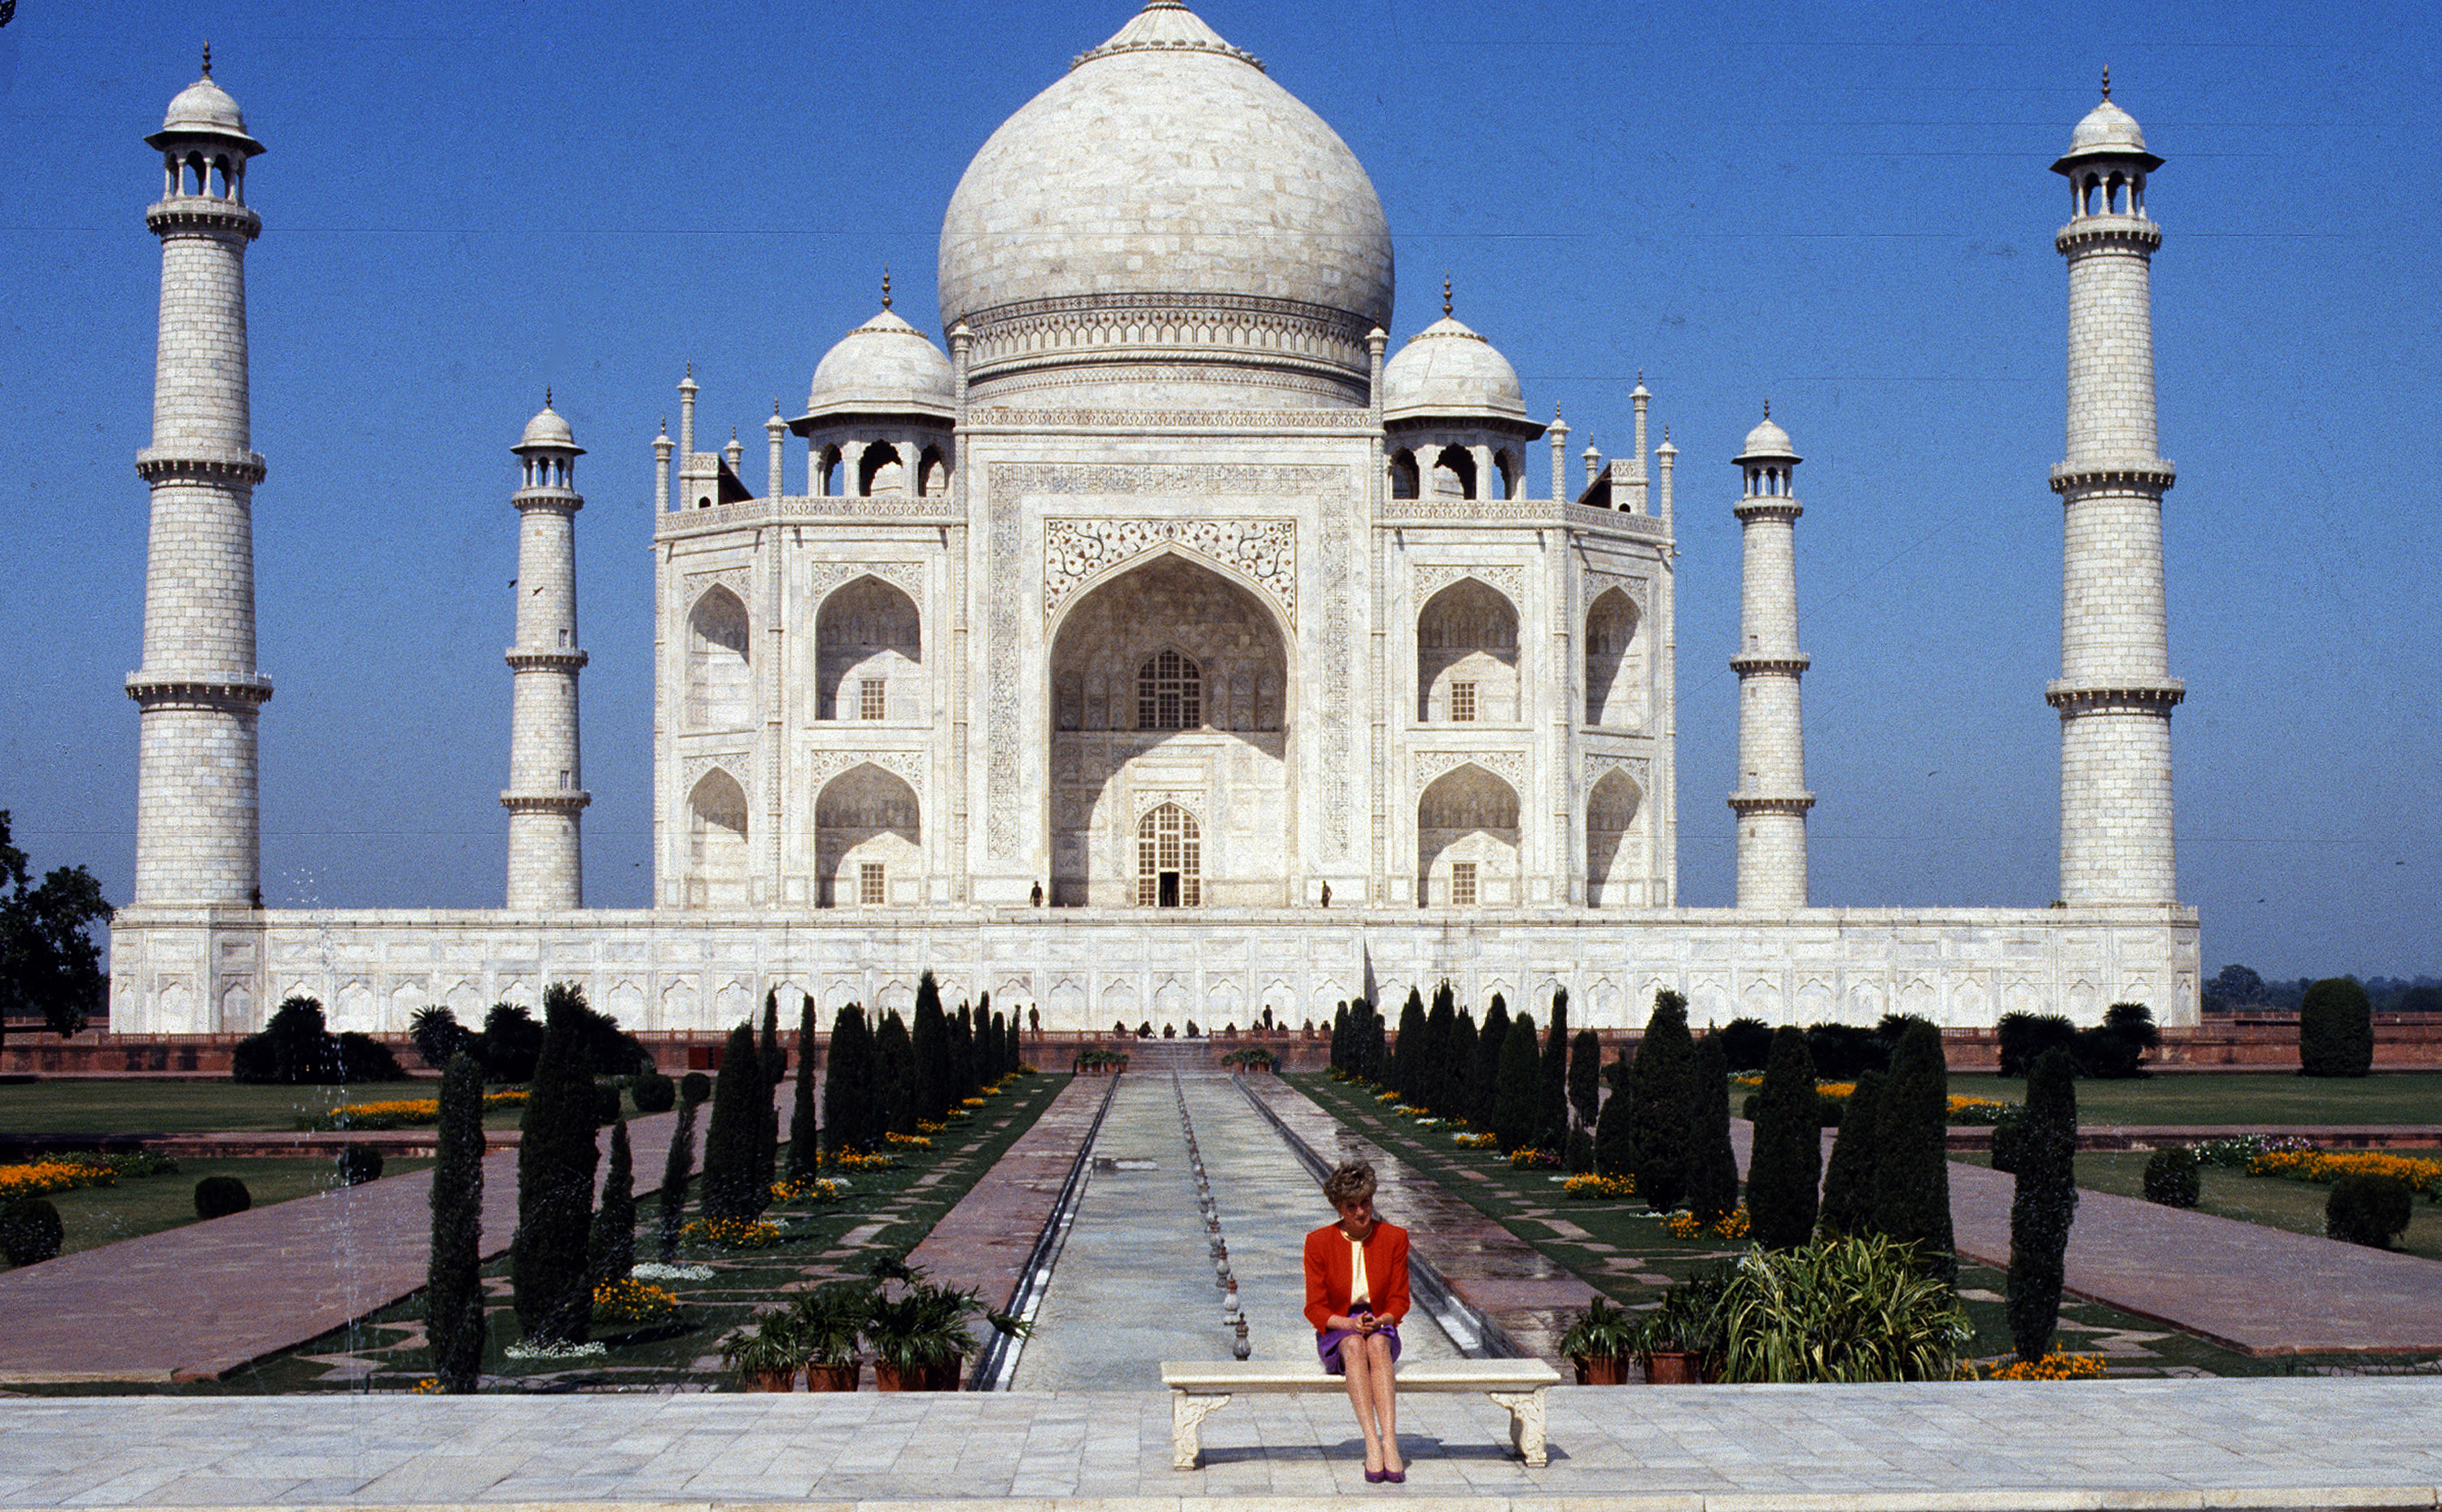 Diana, Princess of Wales, poses alone at the Taj Mahal during her visit to India on Feb. 11, 1992 (Anwar Hussein—Getty Images)